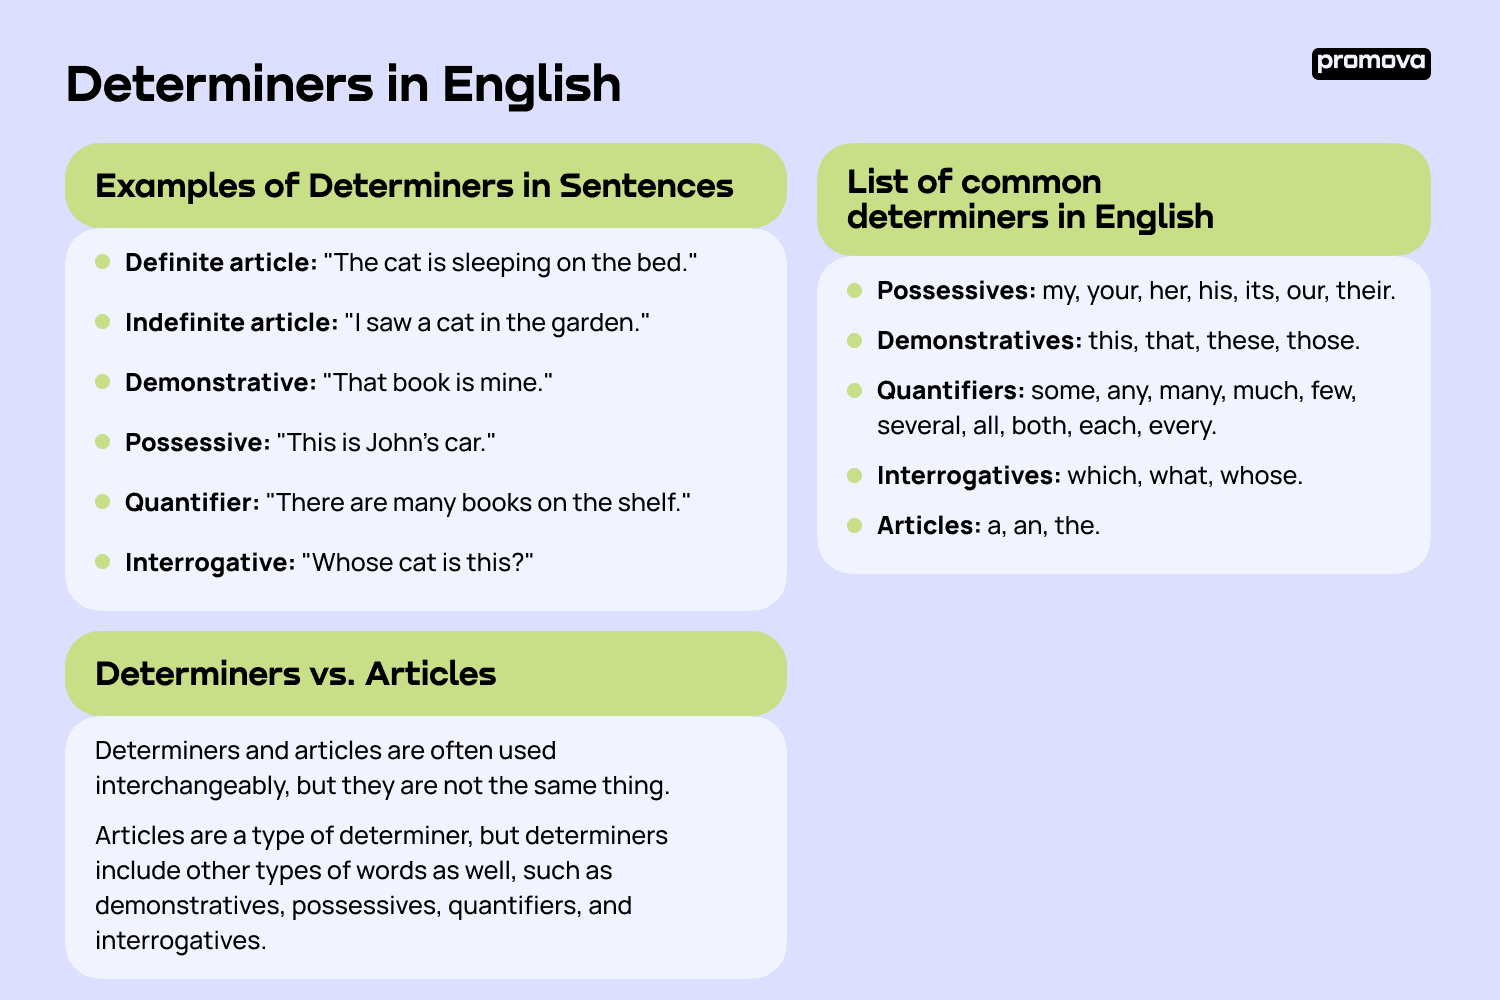 Examples of Determiners in Sentences